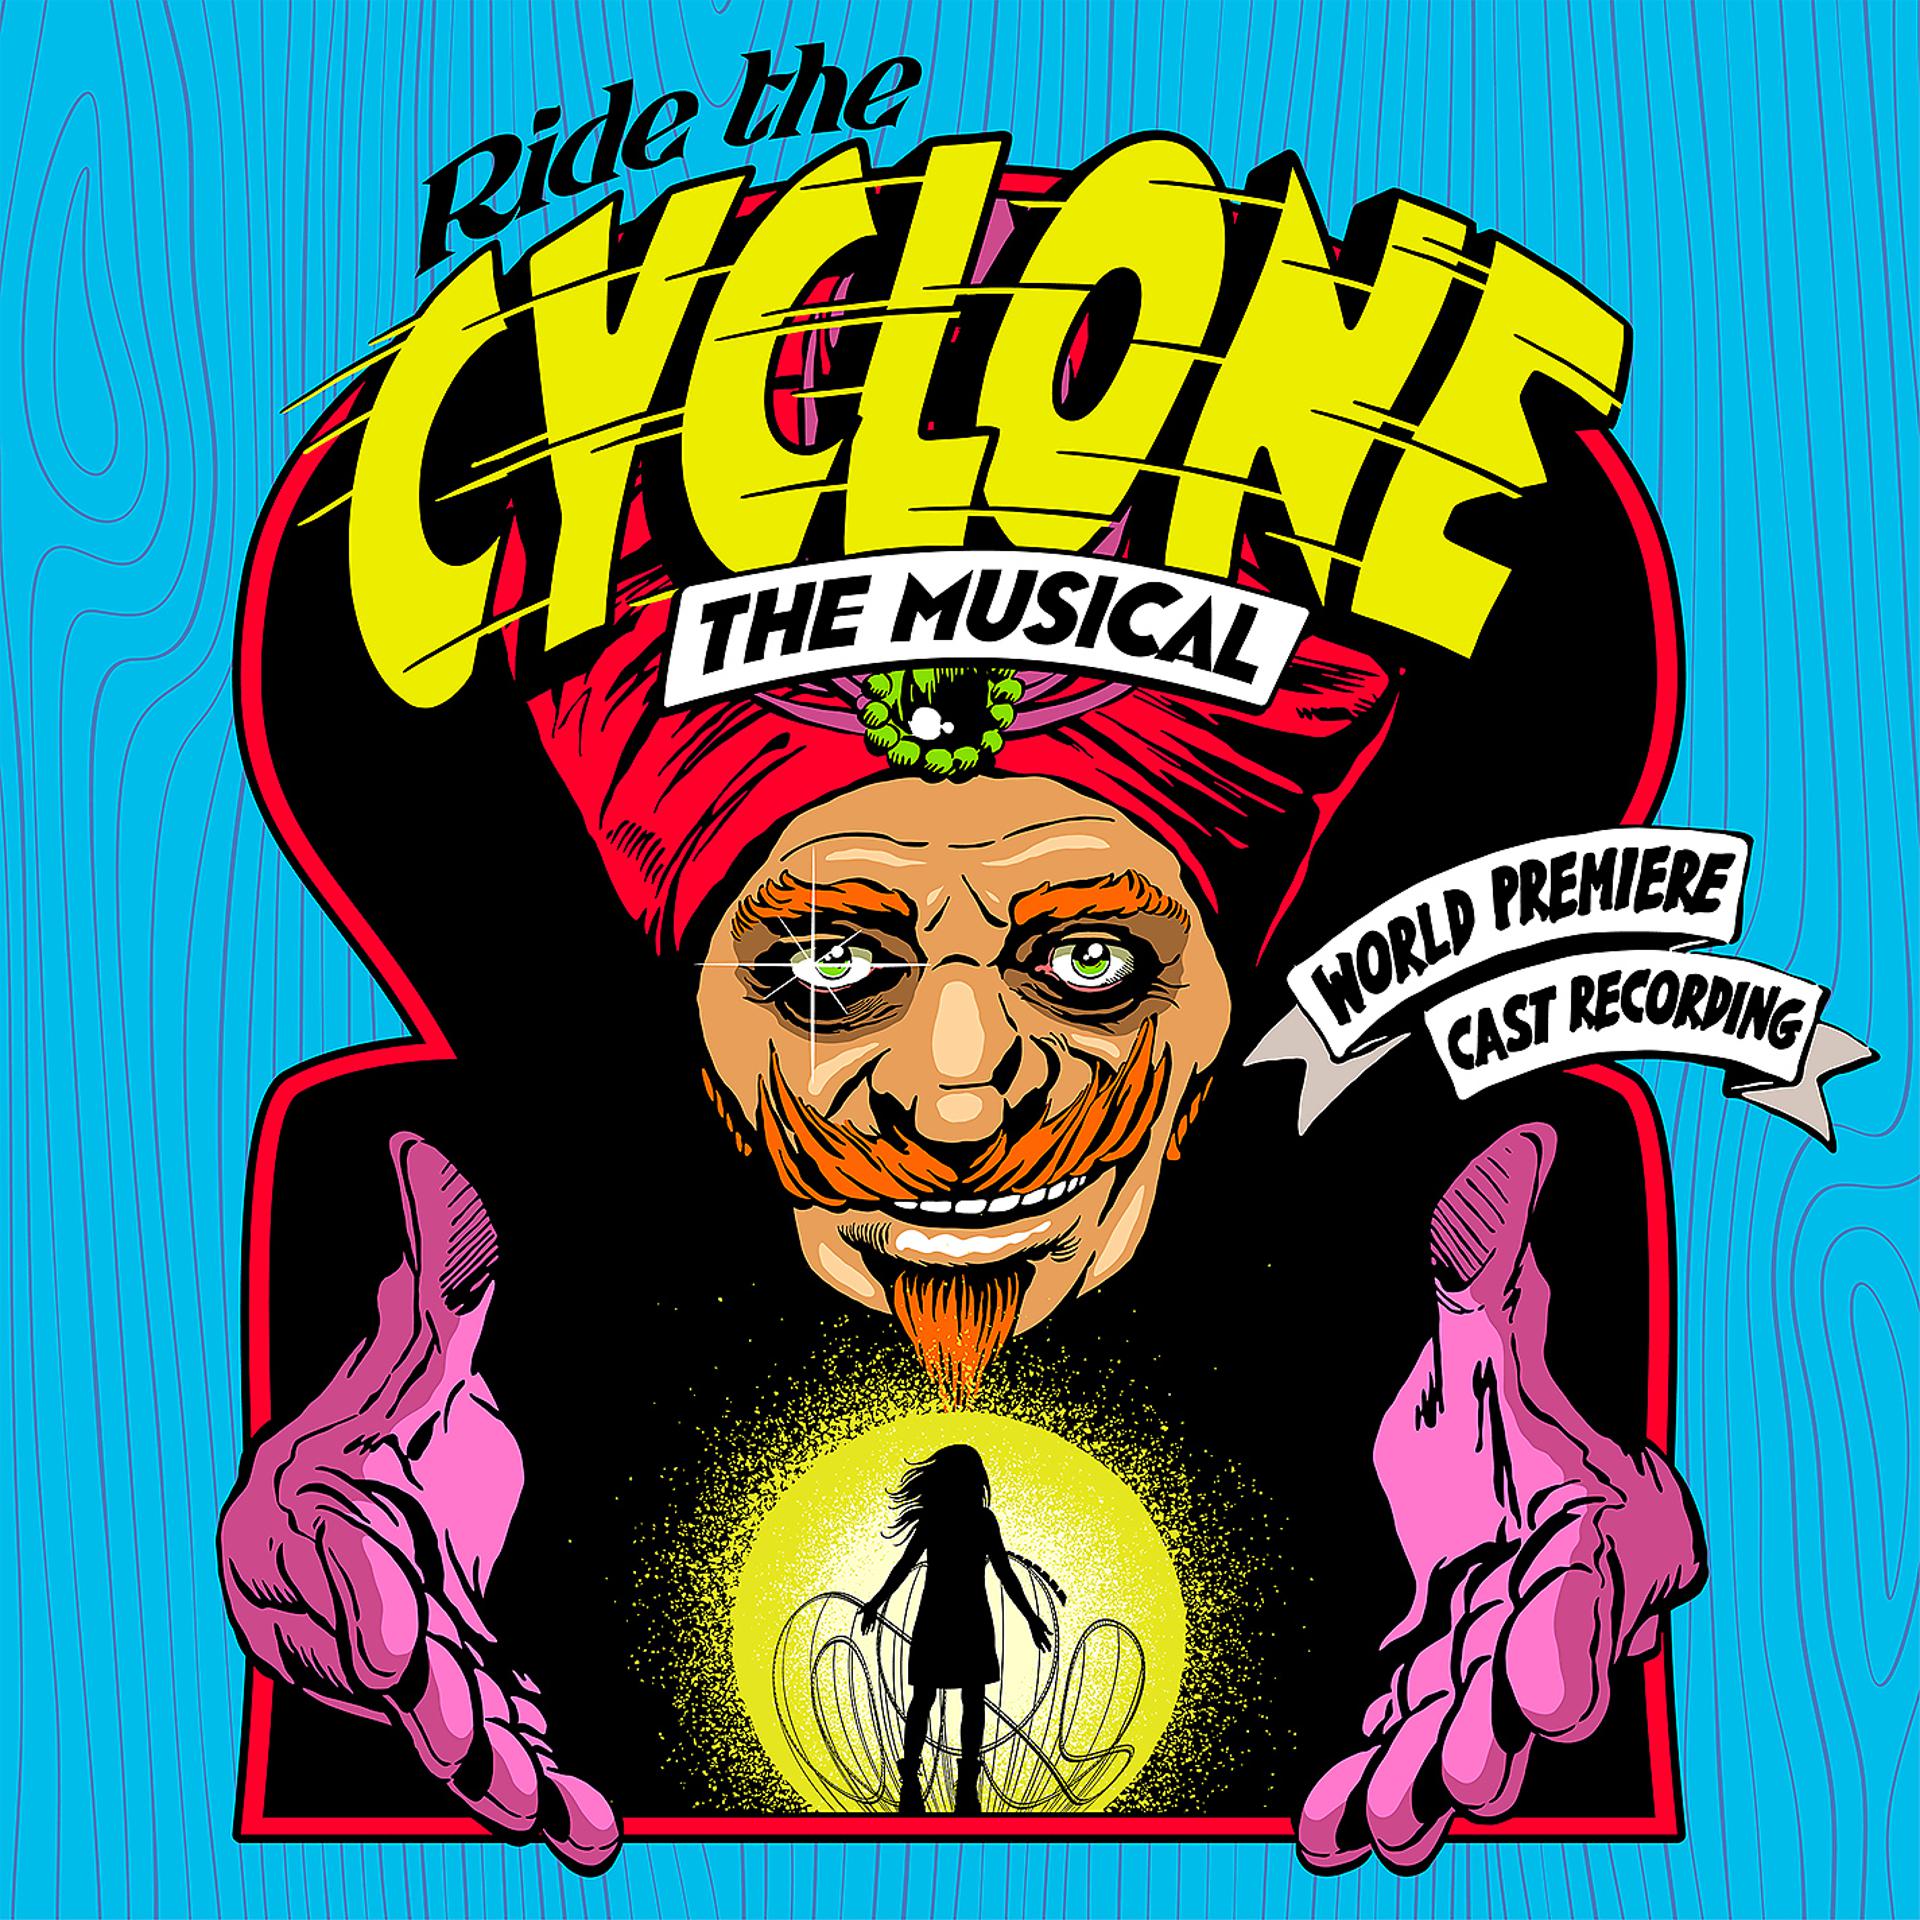 Постер альбома Ride the Cyclone: The Musical (World Premiere Cast Recording)